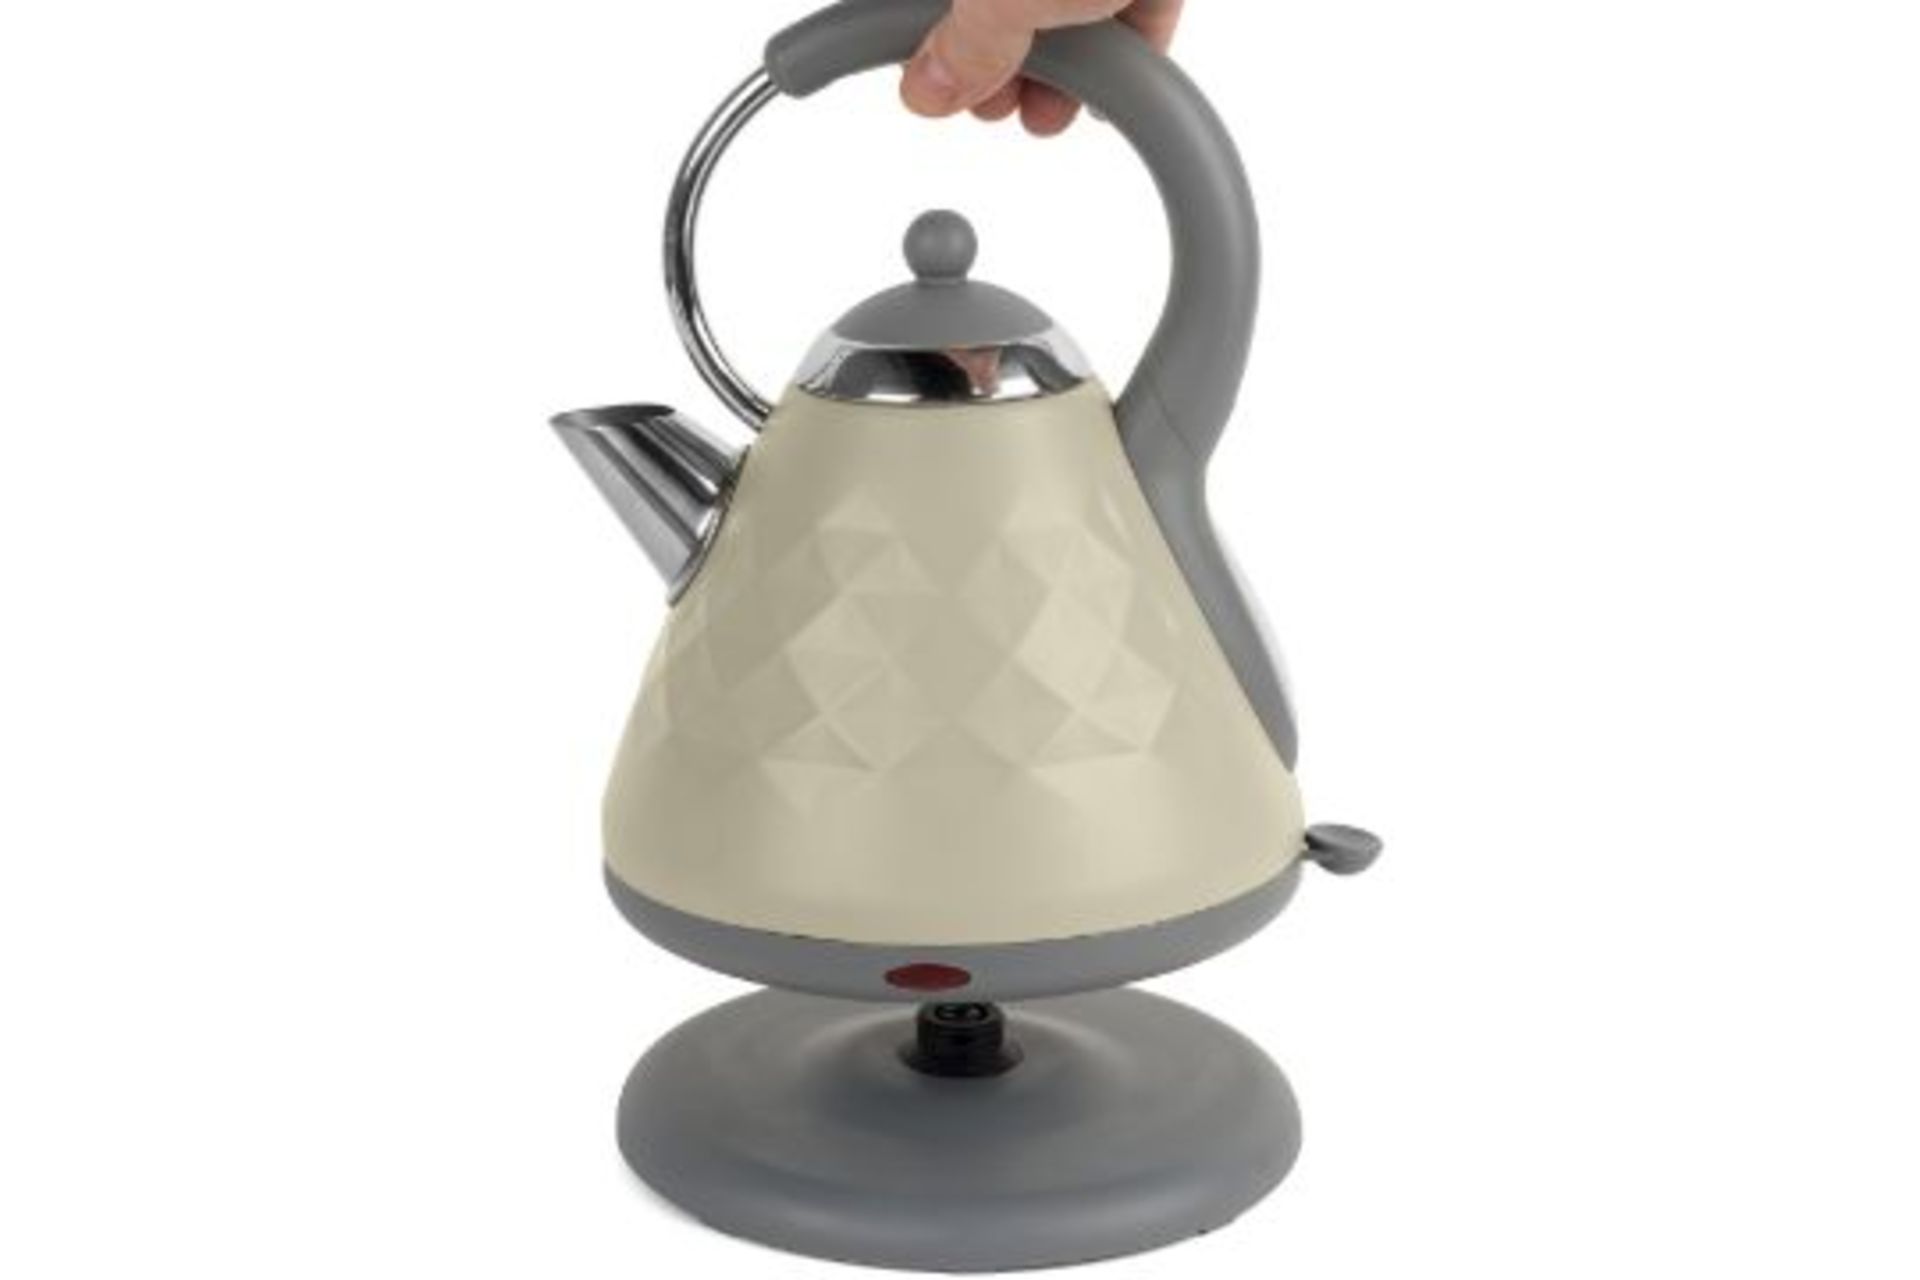 New Salter Cream Pyramid 1.8L Rapid Boil Kettle - Image 2 of 2